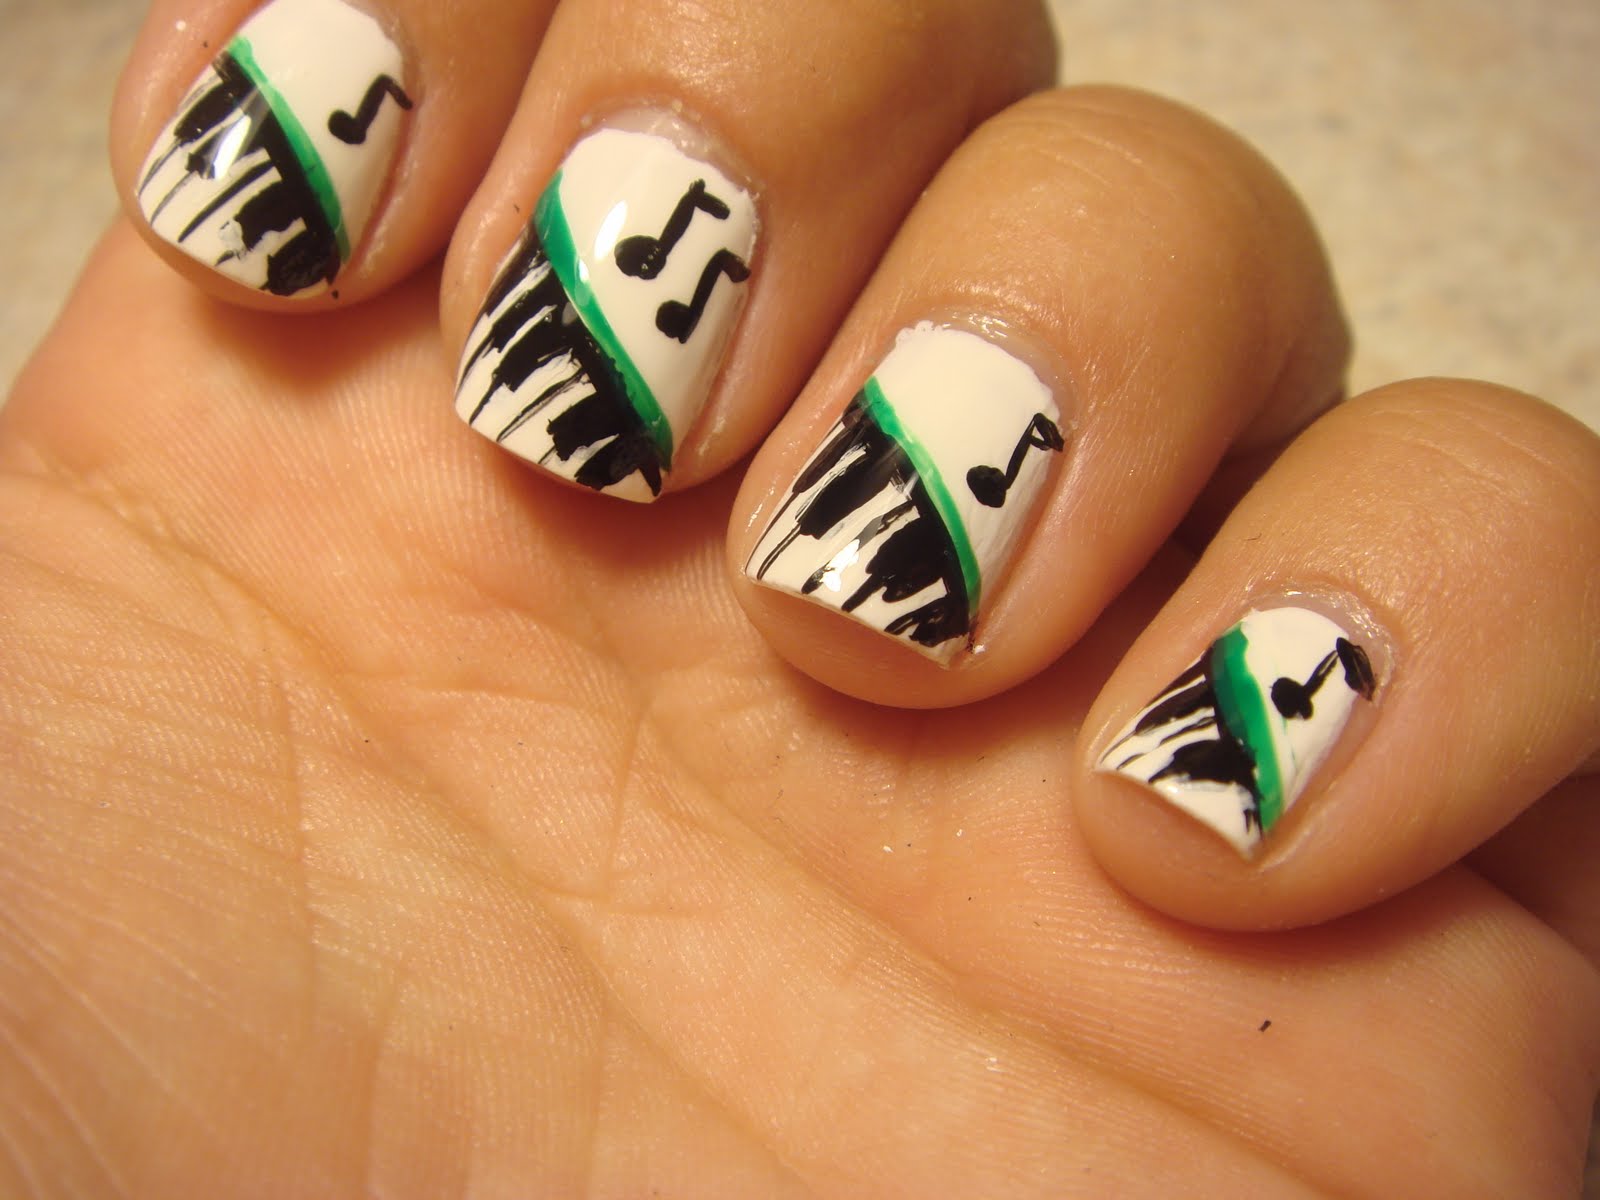 3. Black and White Piano Key Nails - wide 3